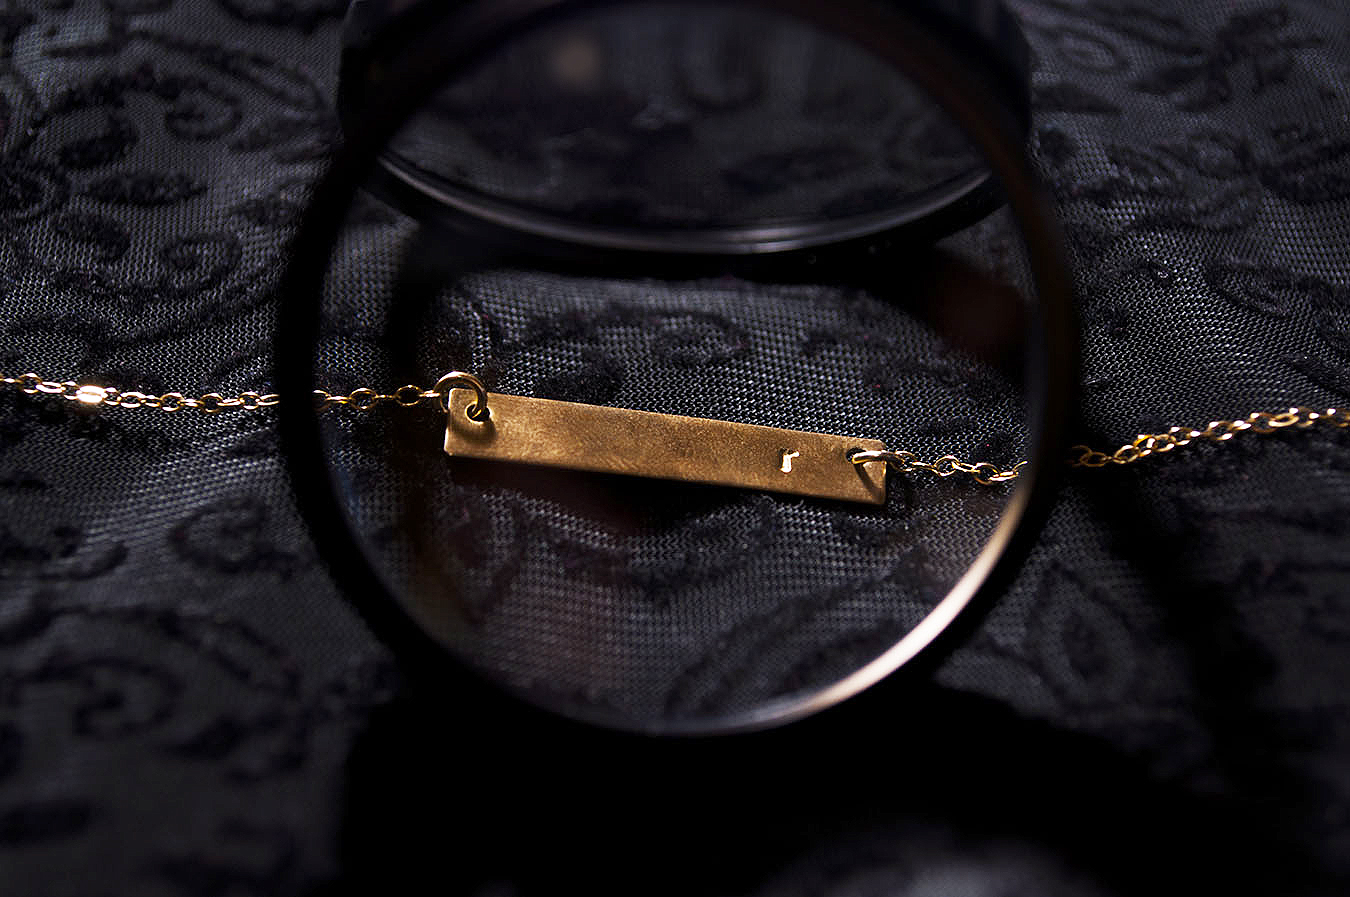 Rebecca_Huang_still_life_photography_dark_velvet_accessories_jewelry_lens_magnifying_reflection_gold_lettered_bar_necklace_chain_floral